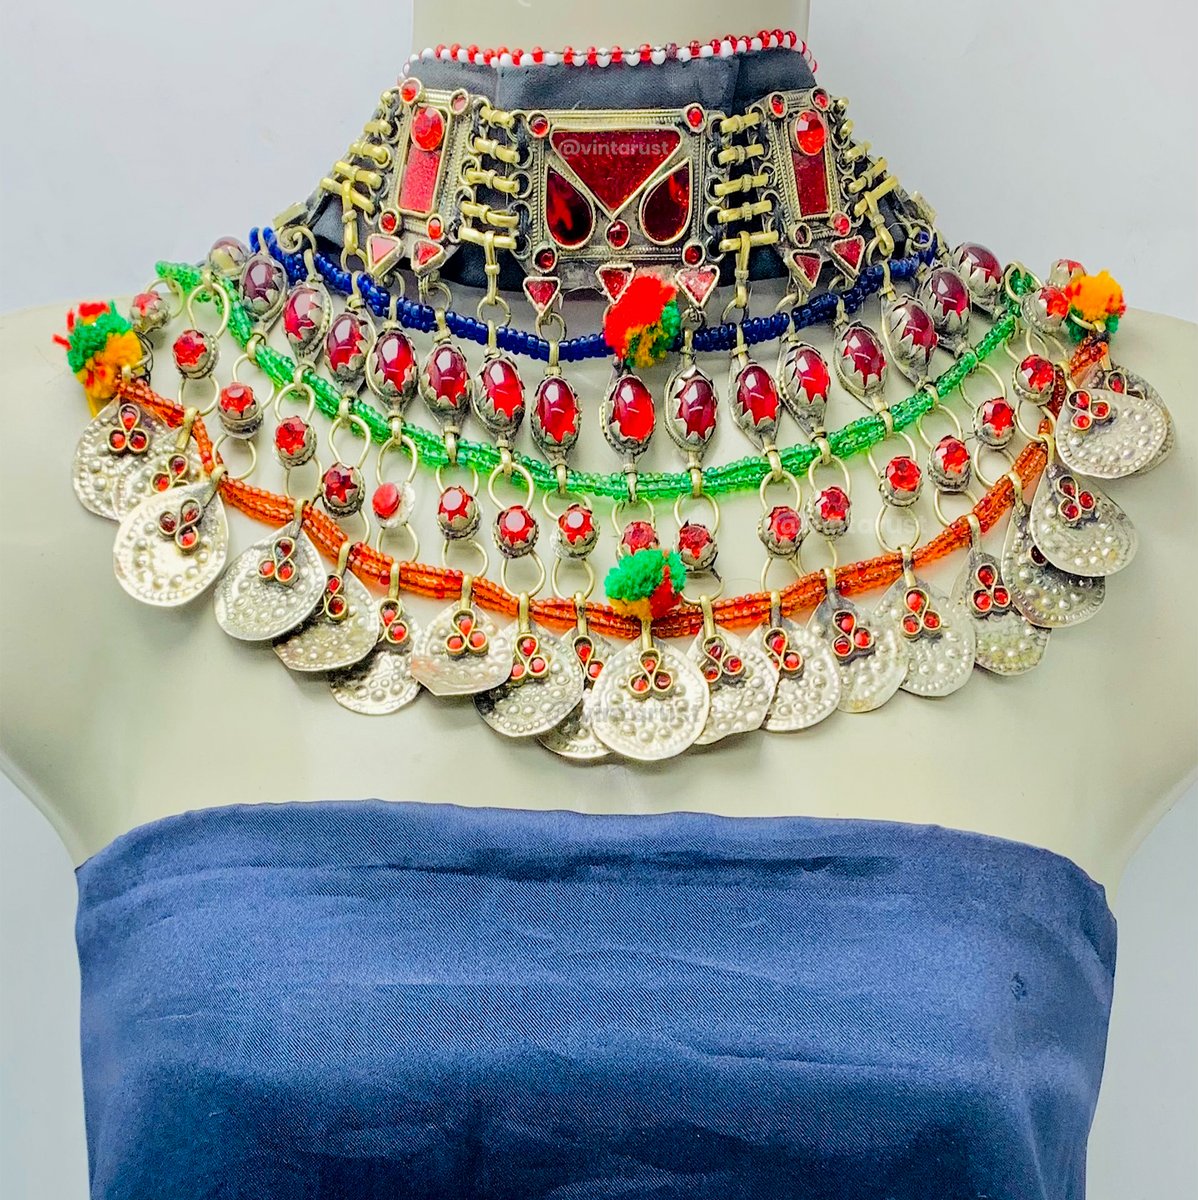 Multicolor Choker Necklace With Silver Dangling Coins.

Shop Now:
buff.ly/3Mu5vpi

#multicolornecklace #chokernecklace #danglingcoins #statementjewelry #vibrantcolors #handcraftedgems #fashionaccessories #jewelrylovers #uniquepieces #vintarust #jewelryfinds #uniquejewelry